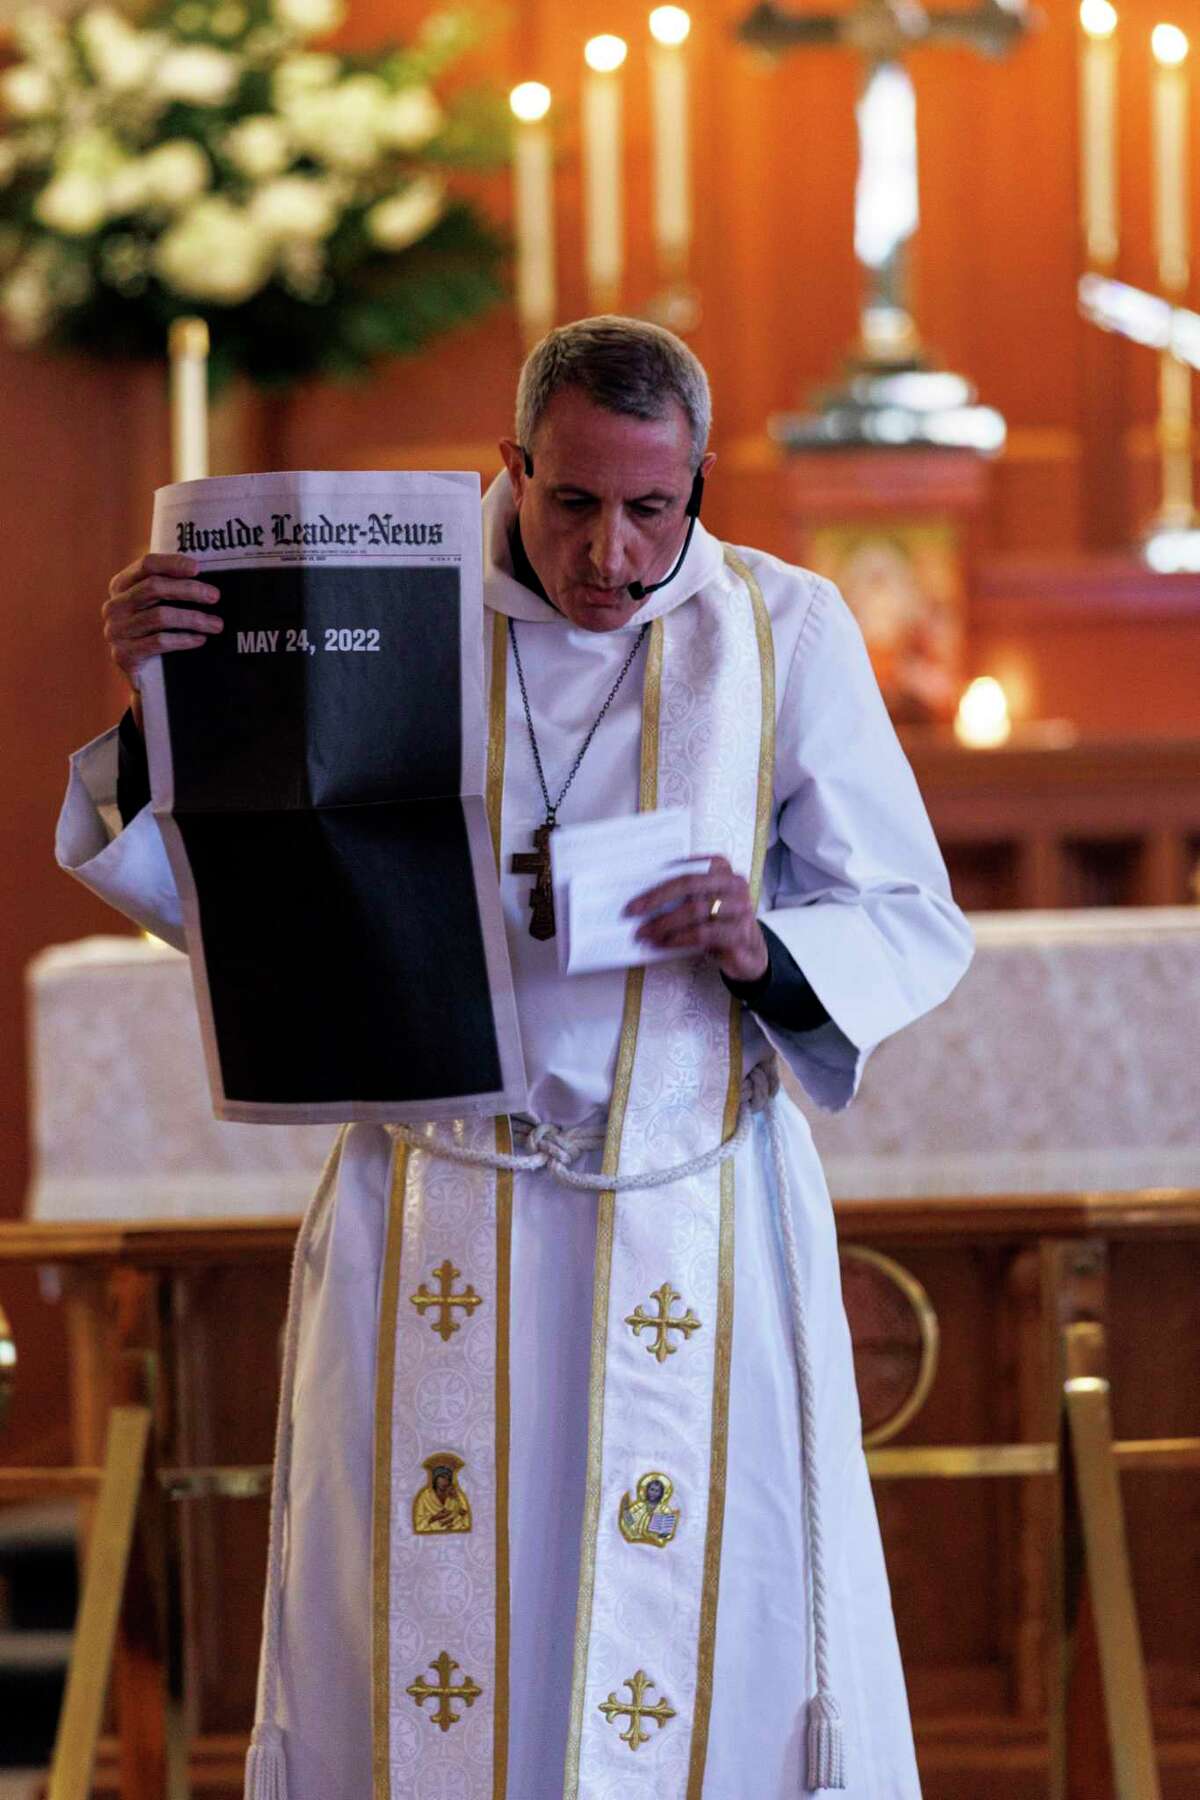 The Rev. Michael K. Marsh holds up a copy of the Uvalde Leader-News during a prayer service at St. Philip’s Episcopal Church in Uvalde two days after the May 24 massacre of 21 people at Robb Elementary School.